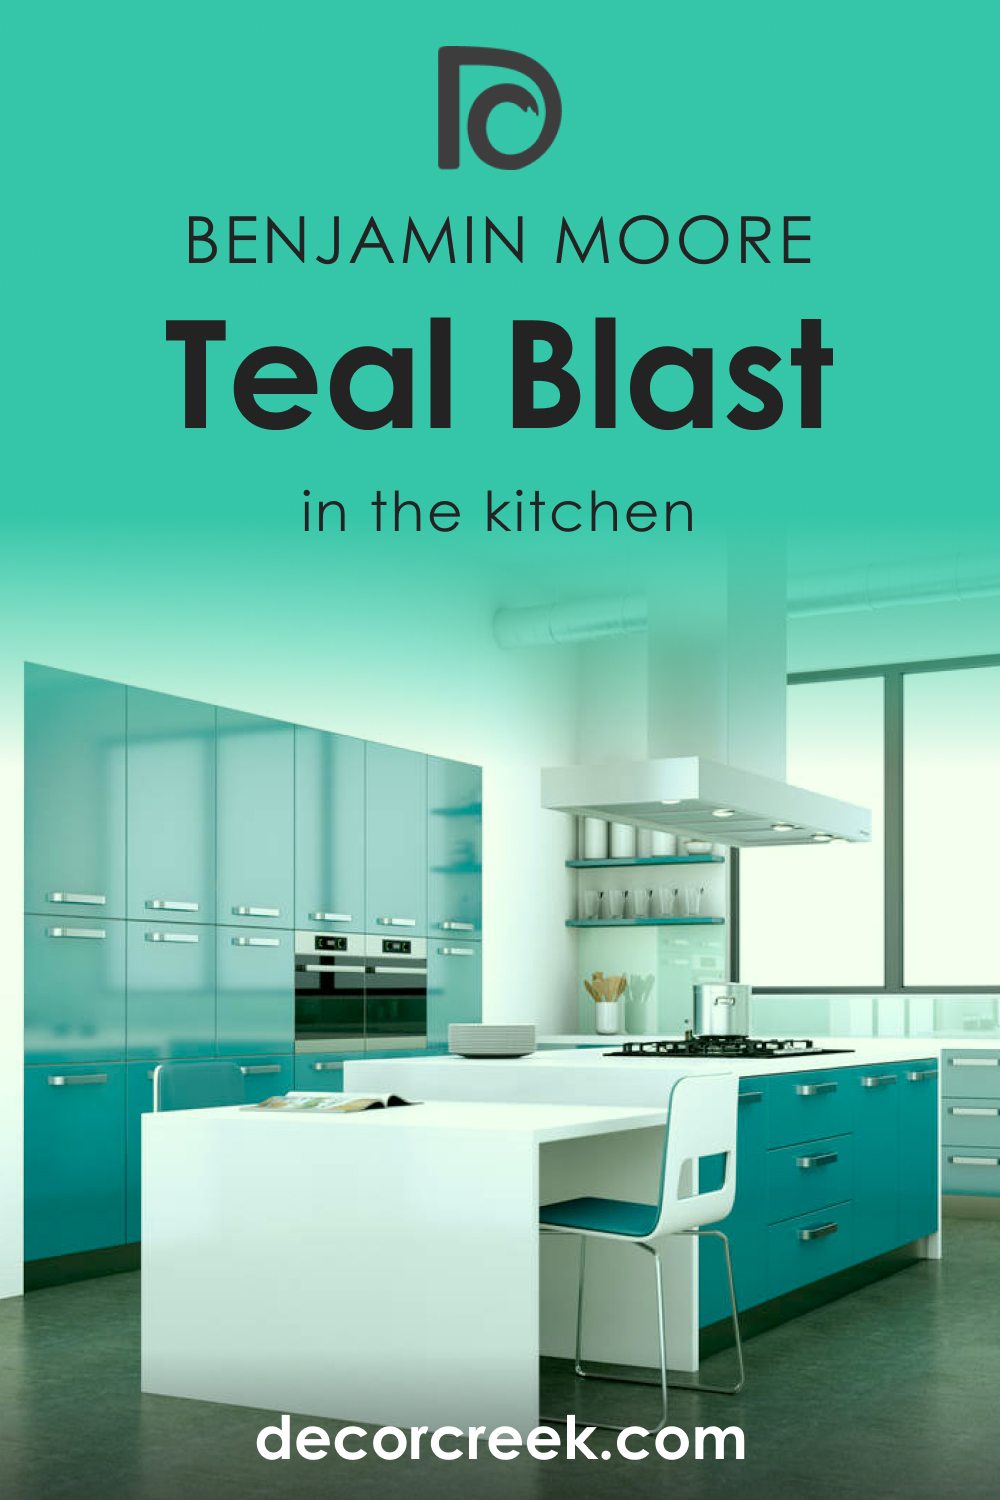 How to Use Teal Blast 2039-40 in the Kitchen?